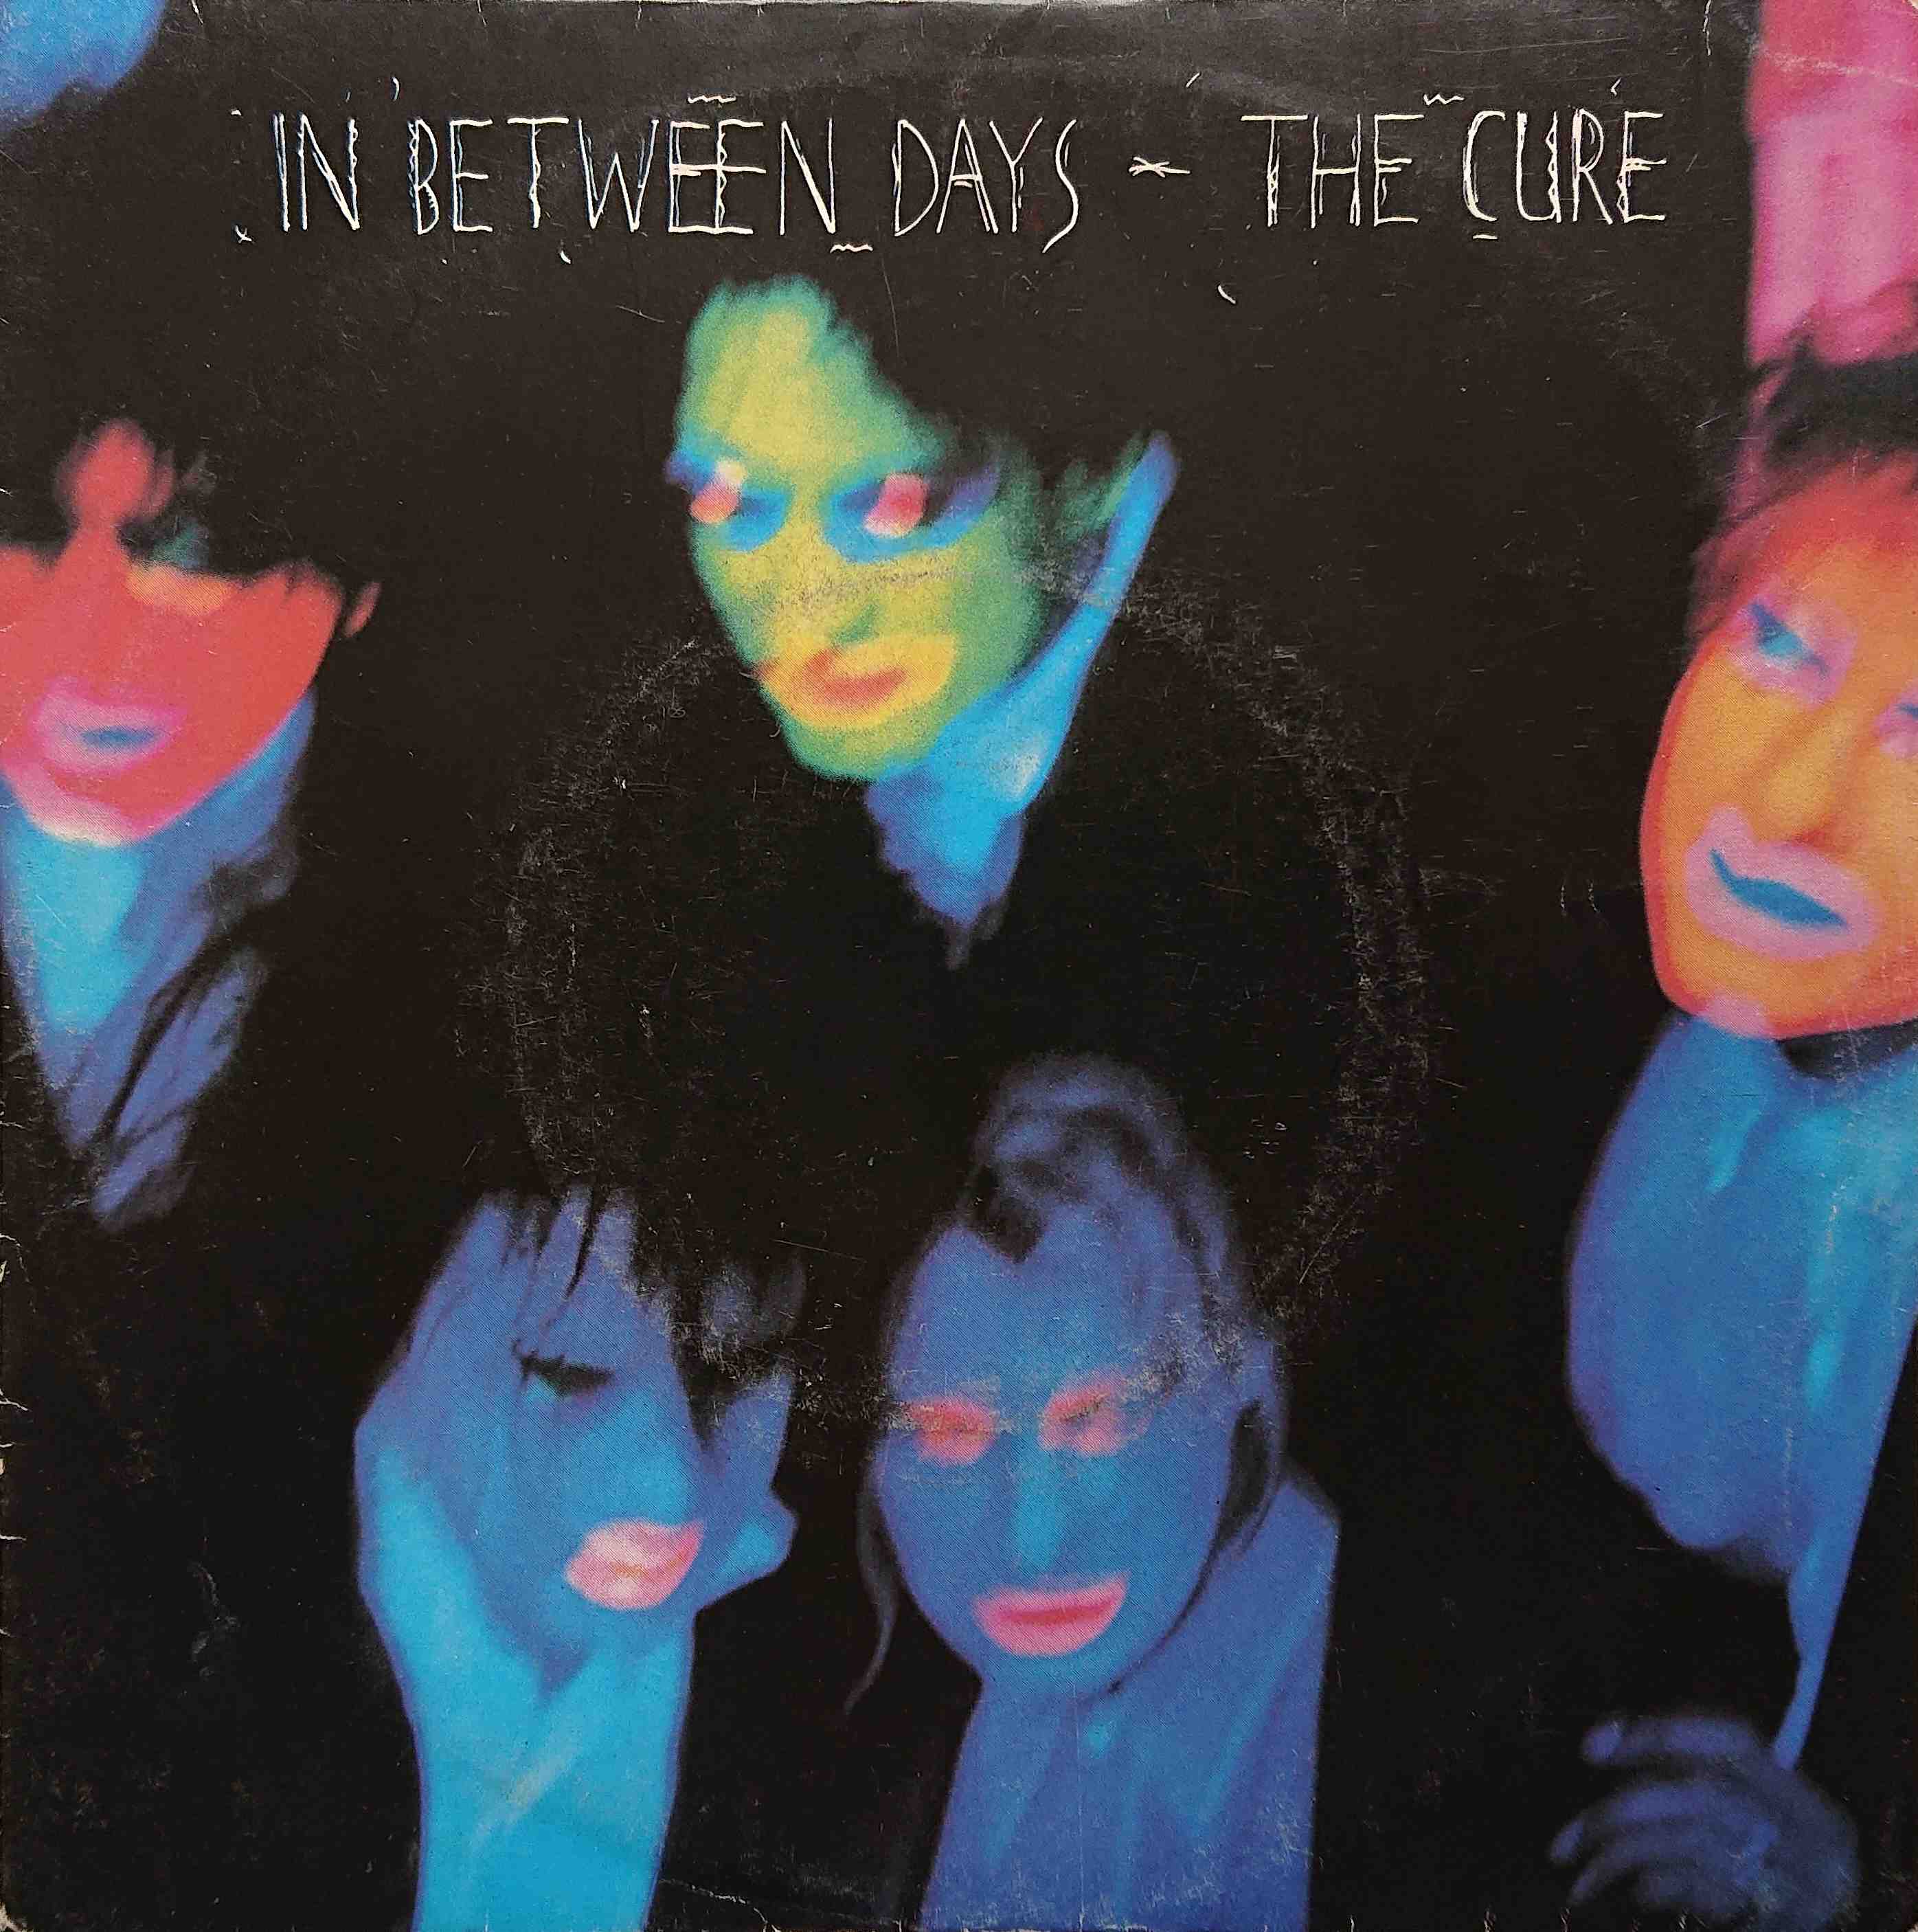 Picture of In between days by artist The Cure  